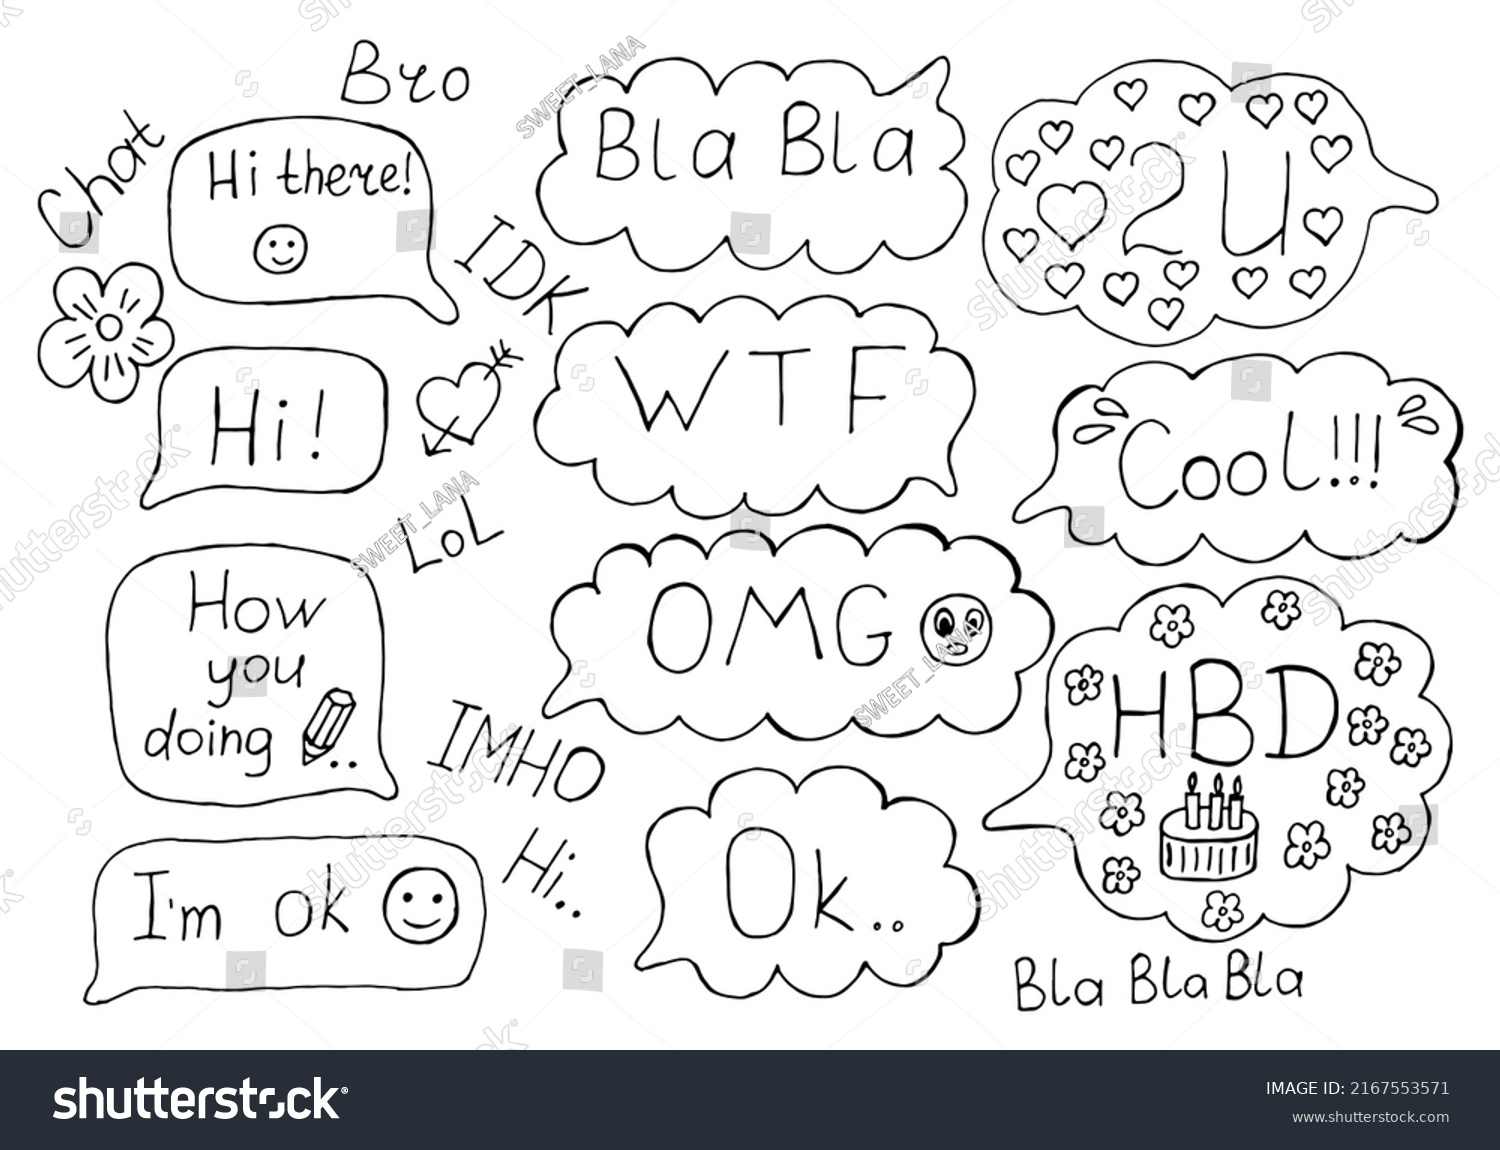 SVG of Speech bubbles set with expression text HI, OK, LOL, WTF, OMG, HBD, COOL, 2U, BLA,BLA, IMHO and other abbreviations and elements isolated on white background. Pop art style. Vector illustration. svg